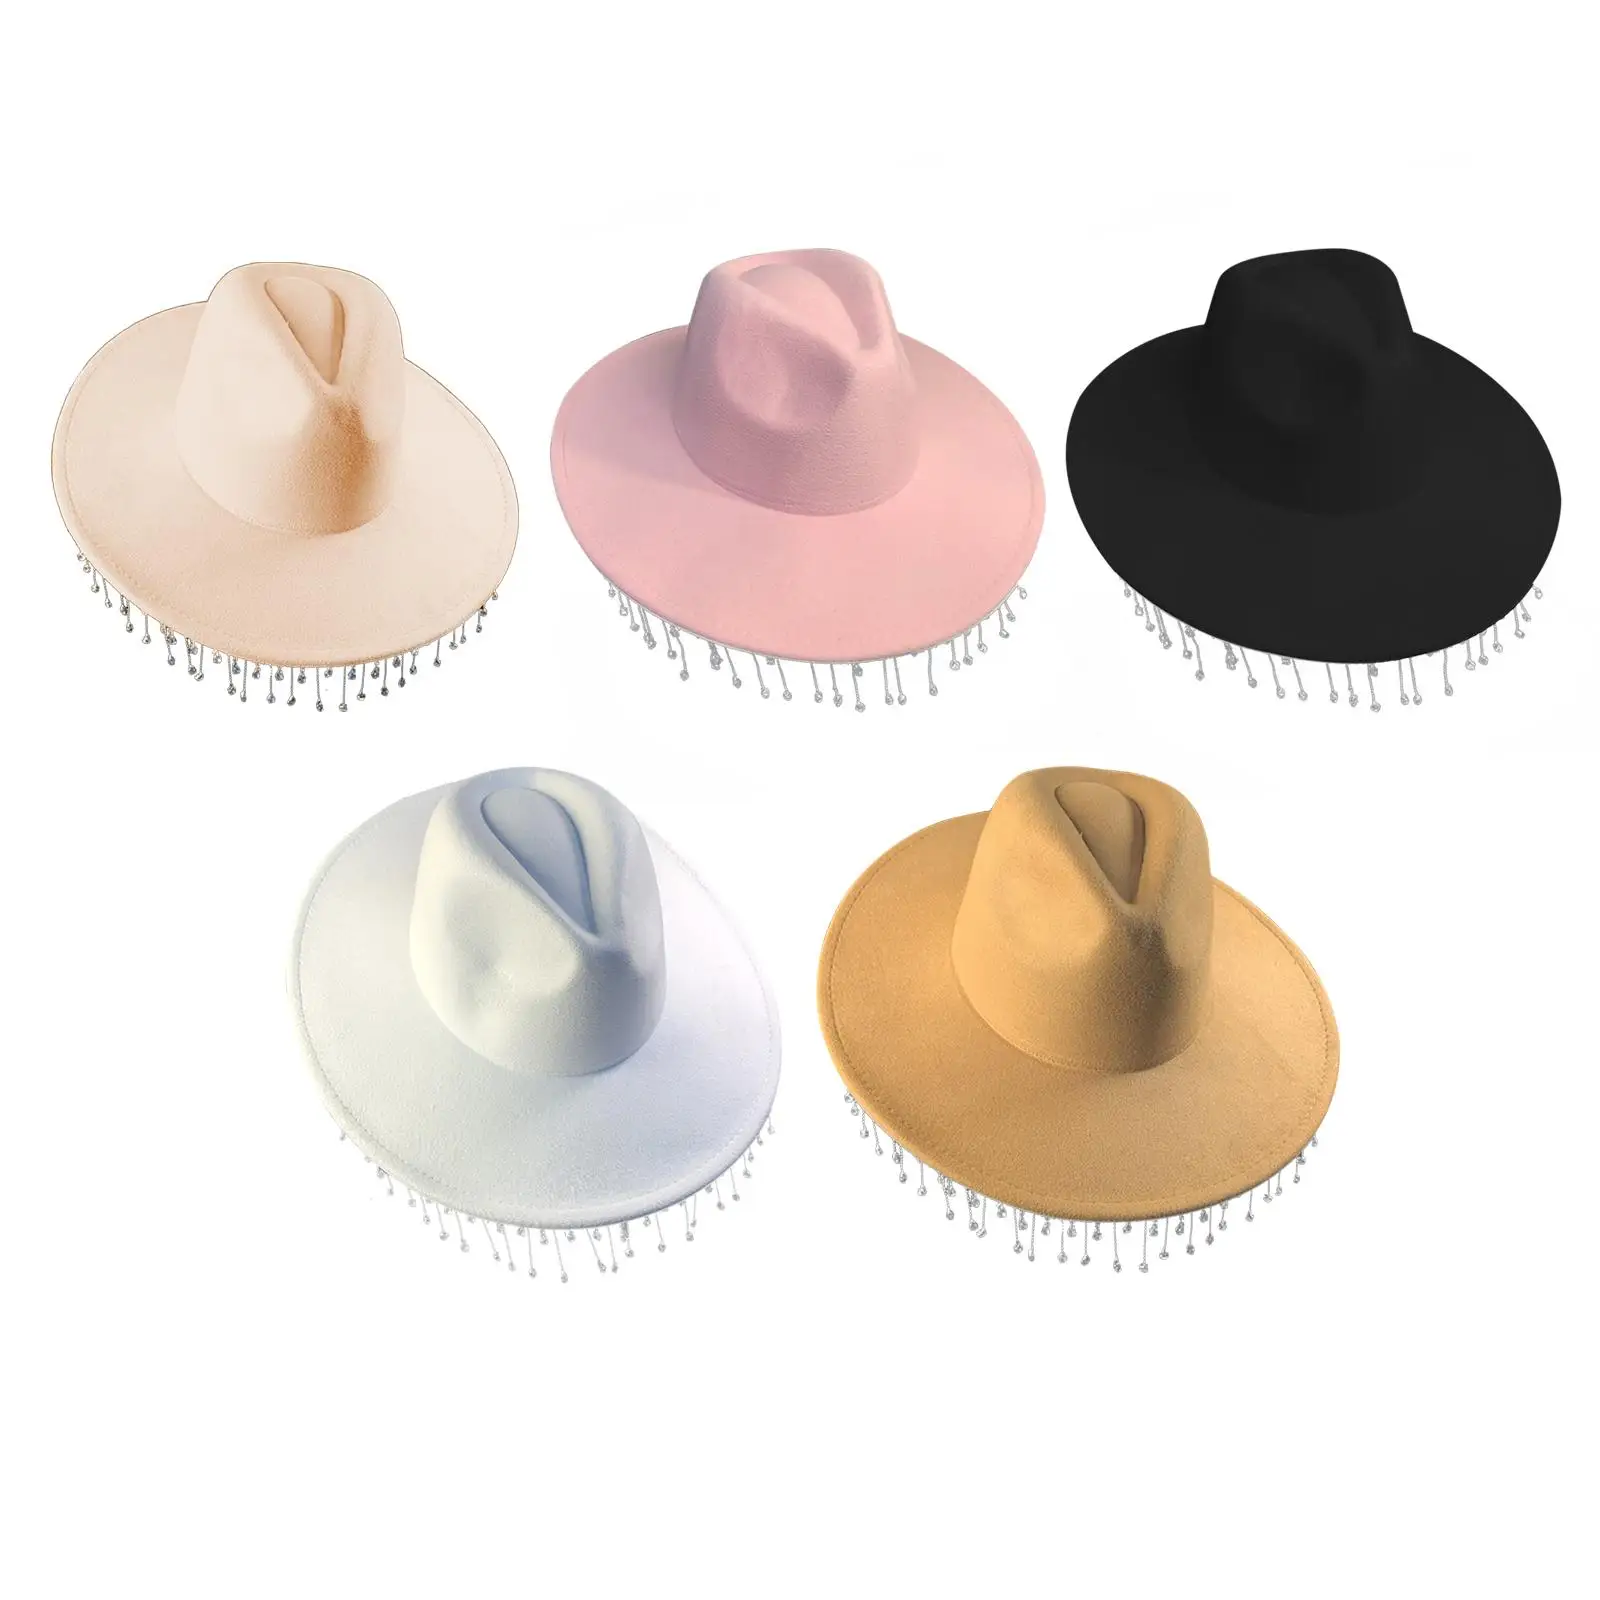 Cowboy Hat Jazz Top Hat Sunhat for Performance Costume Clothes Accessories